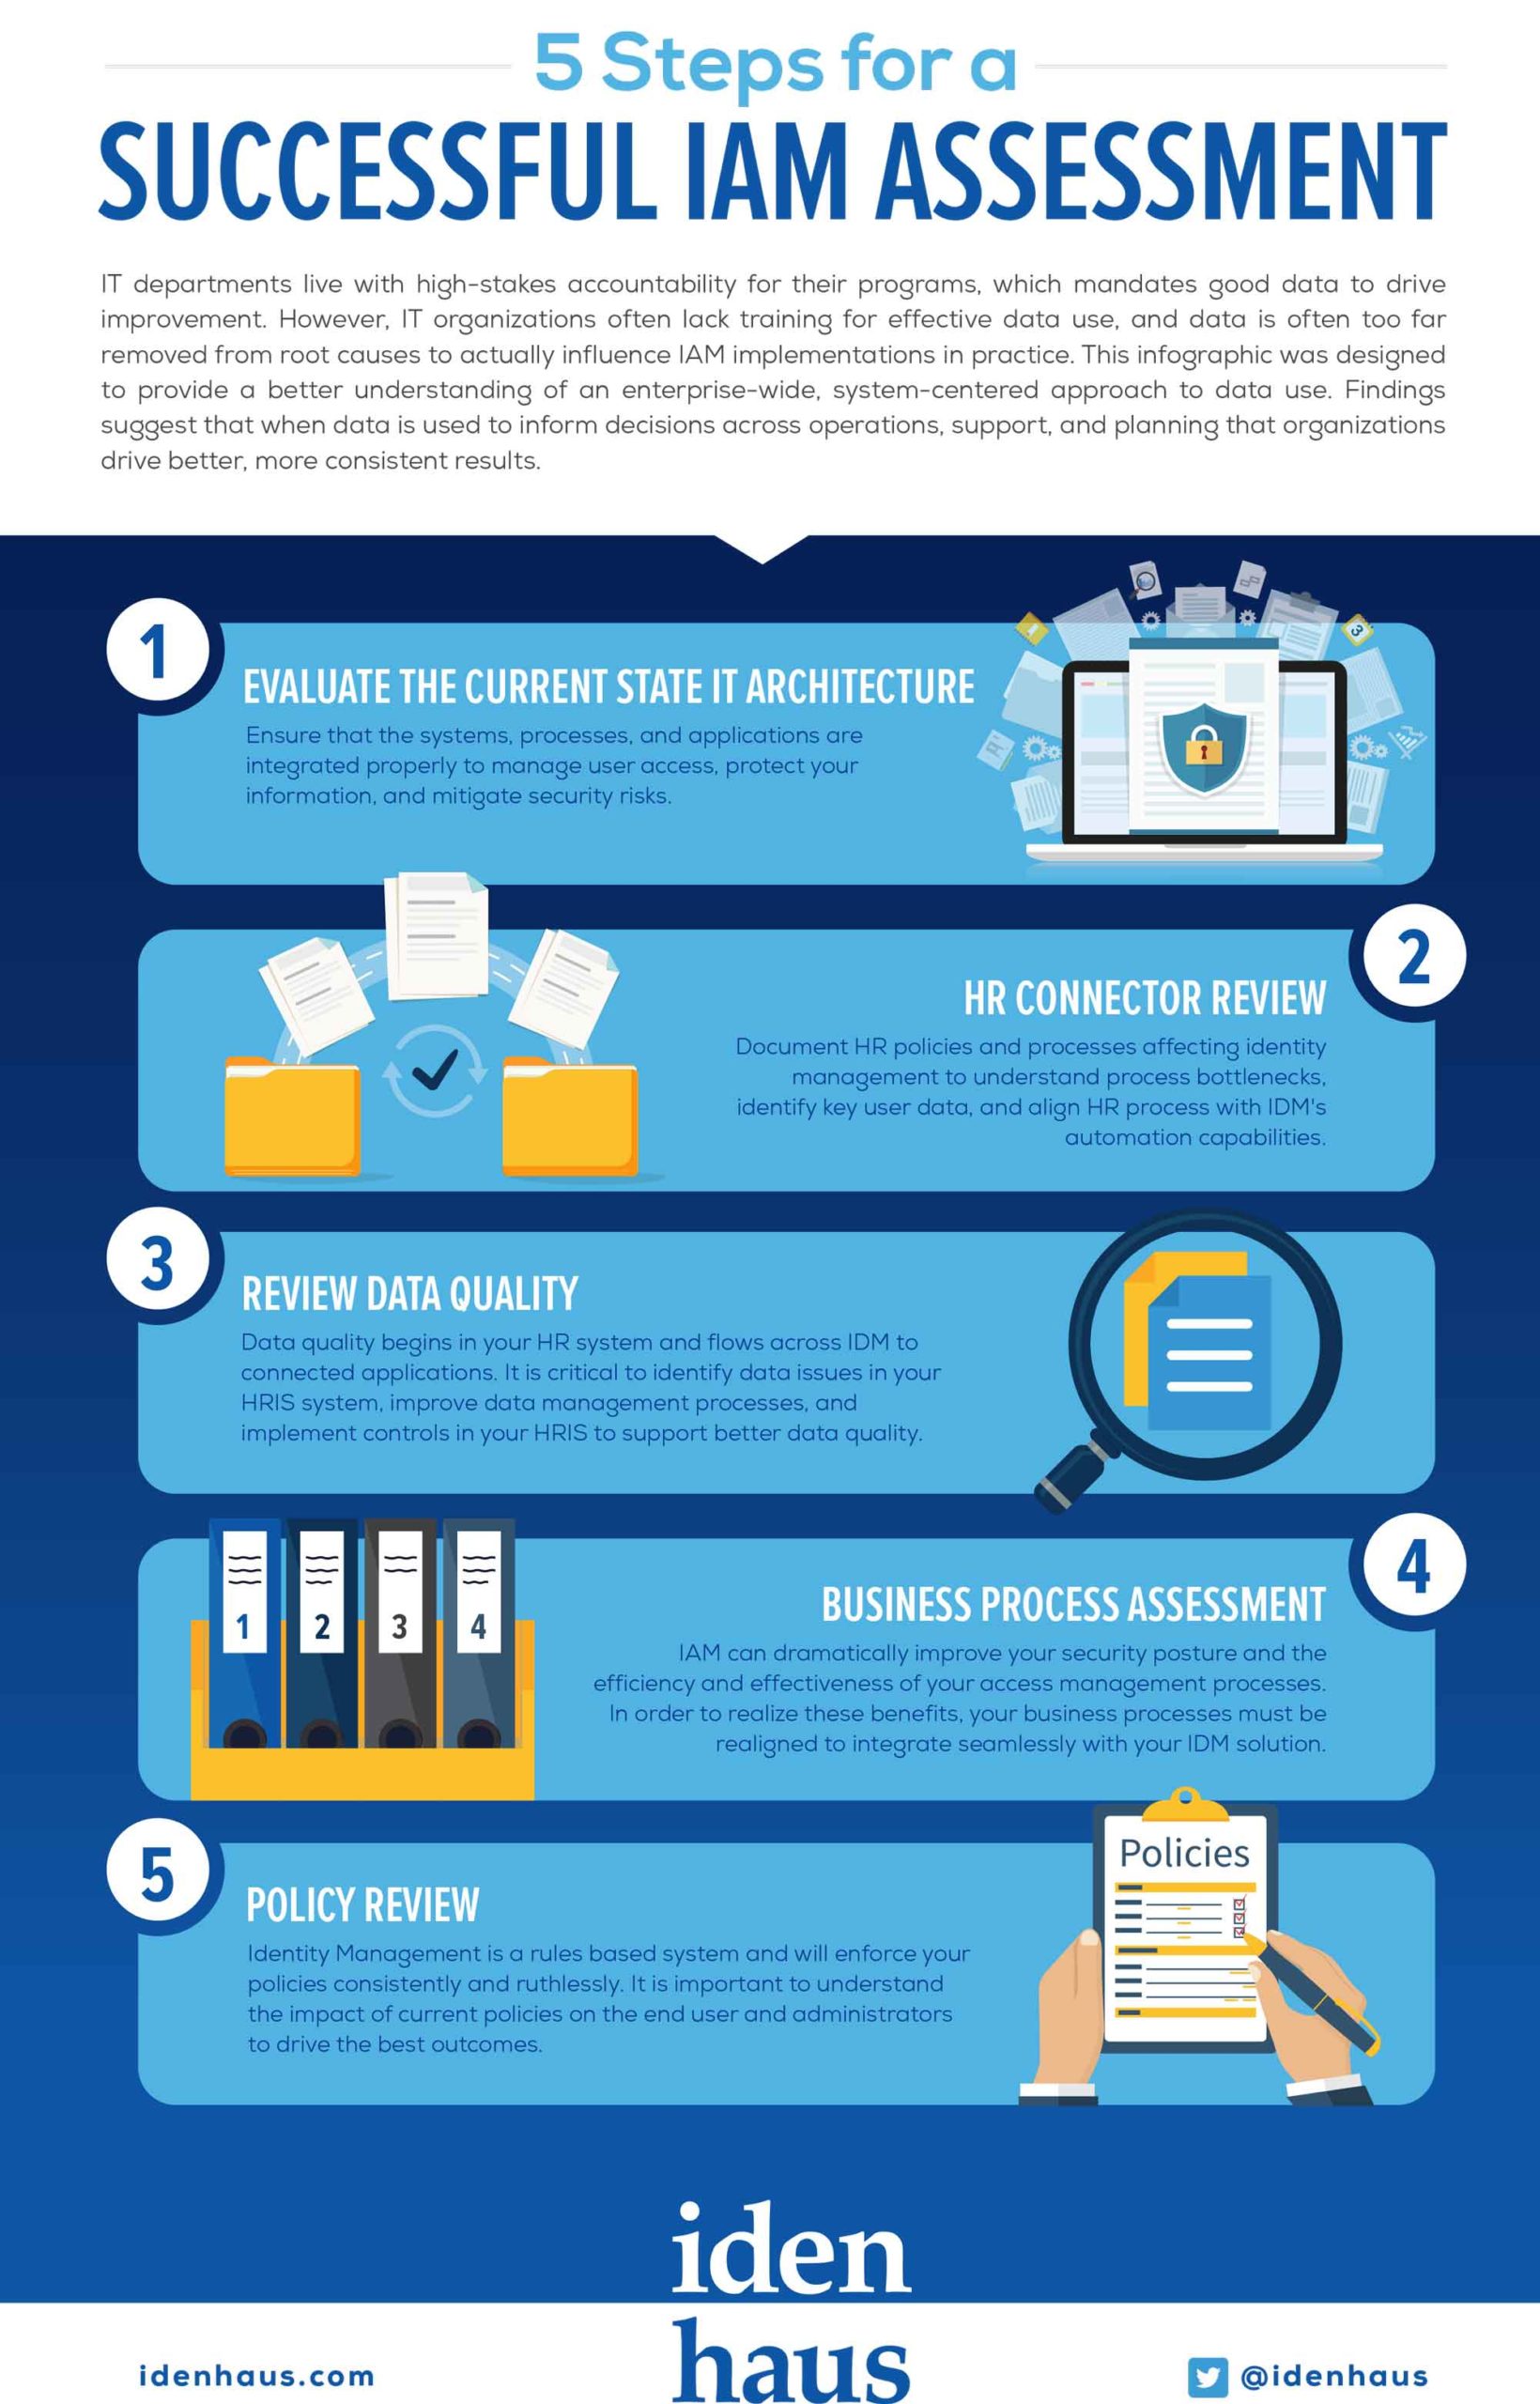 5-Steps-for-a-Successful-IAM-Assessment-Infographic